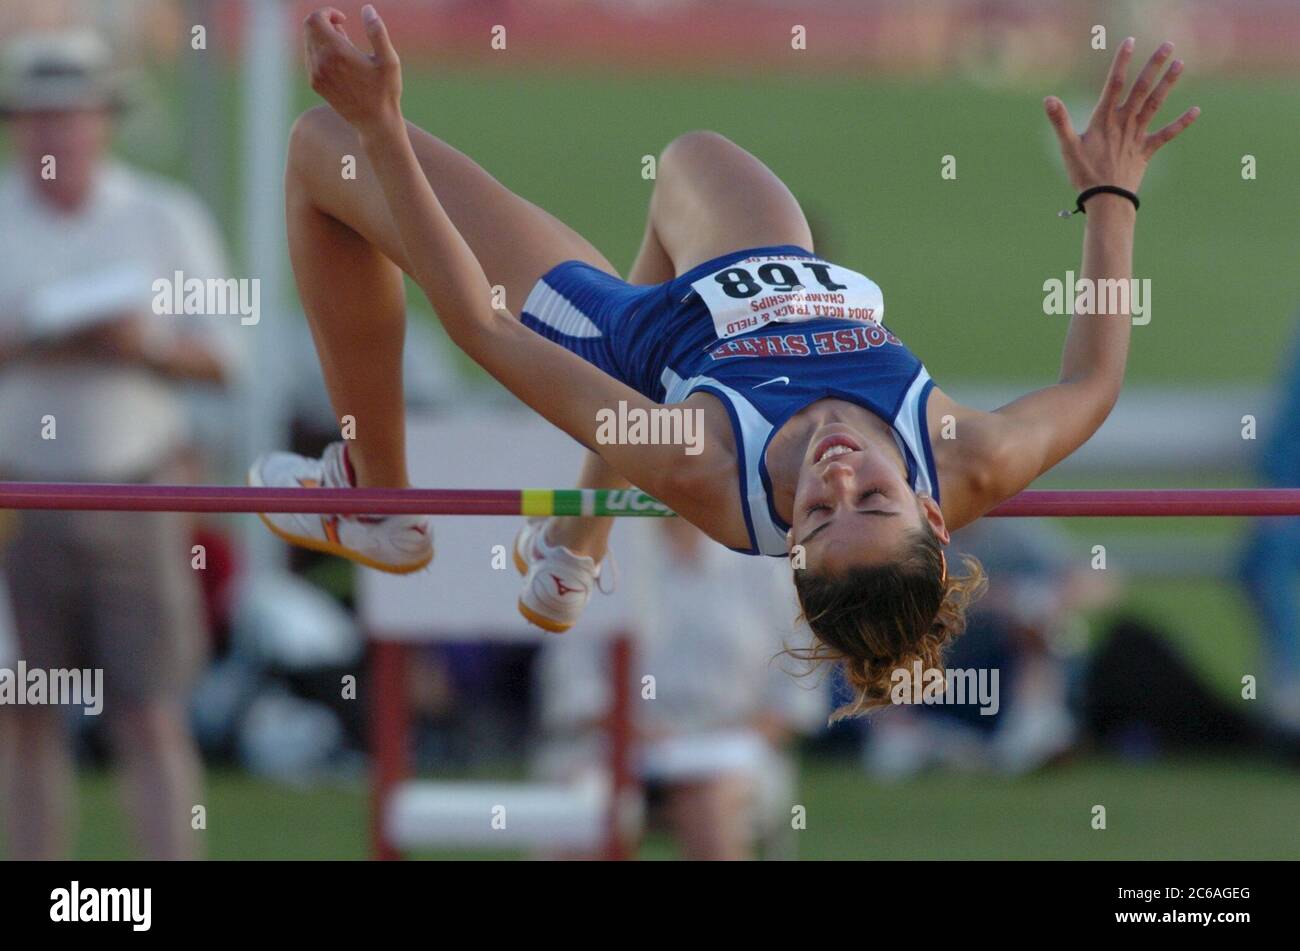 Austin Texas USA, June 2004: Female athlete from Boise State University leaps over the bar during the high jump event at the National Collegiate Athletic Association (NCAA)) Division I Outdoor Track & Field Championships. ©Bob Daemmrich Stock Photo